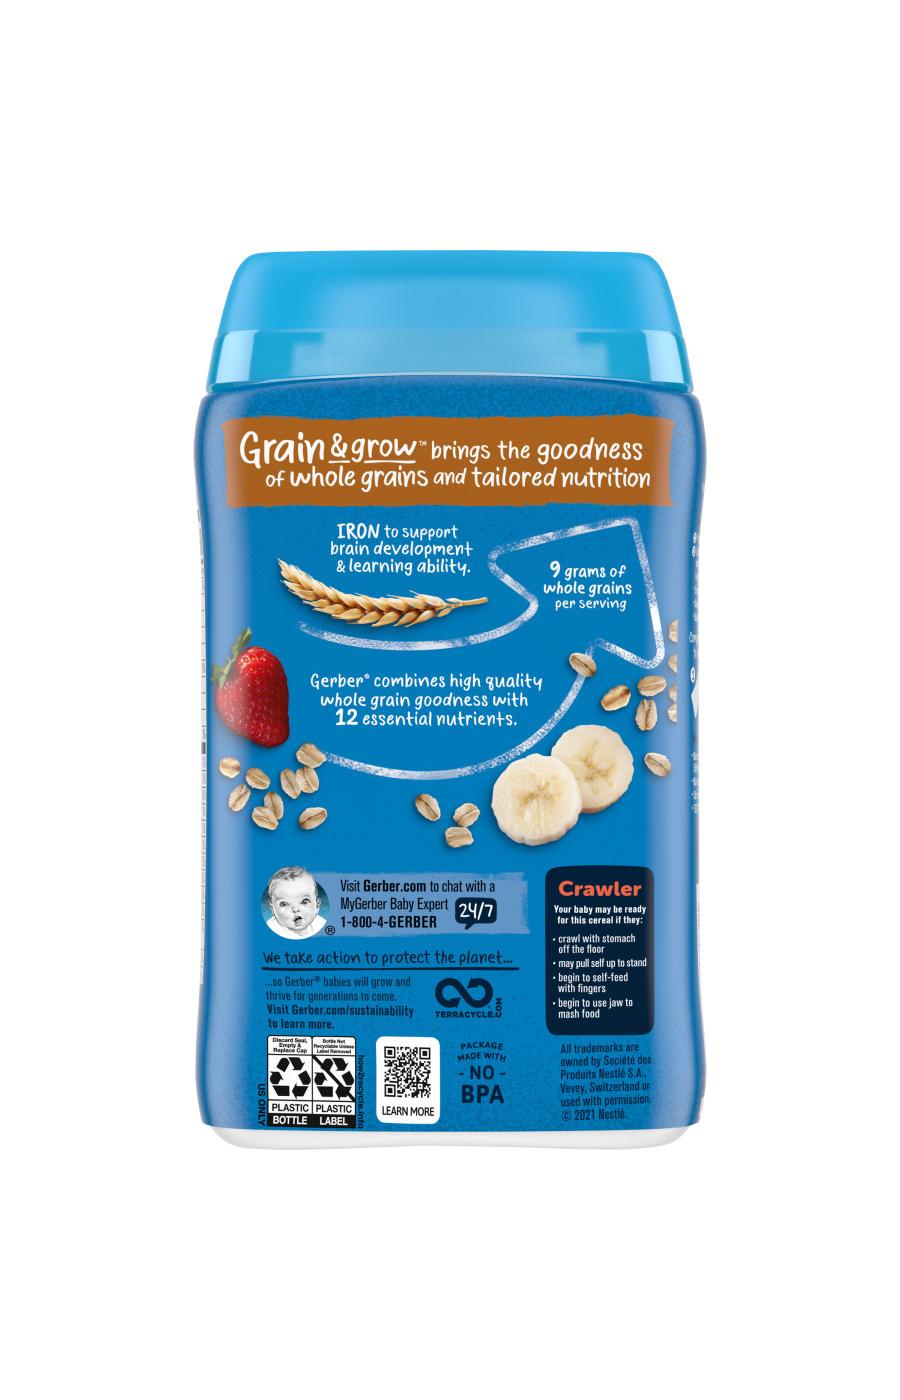 Gerber Cereal for Baby Grain & Grow Lil' Bits - Oatmeal Banana & Strawberry; image 8 of 8